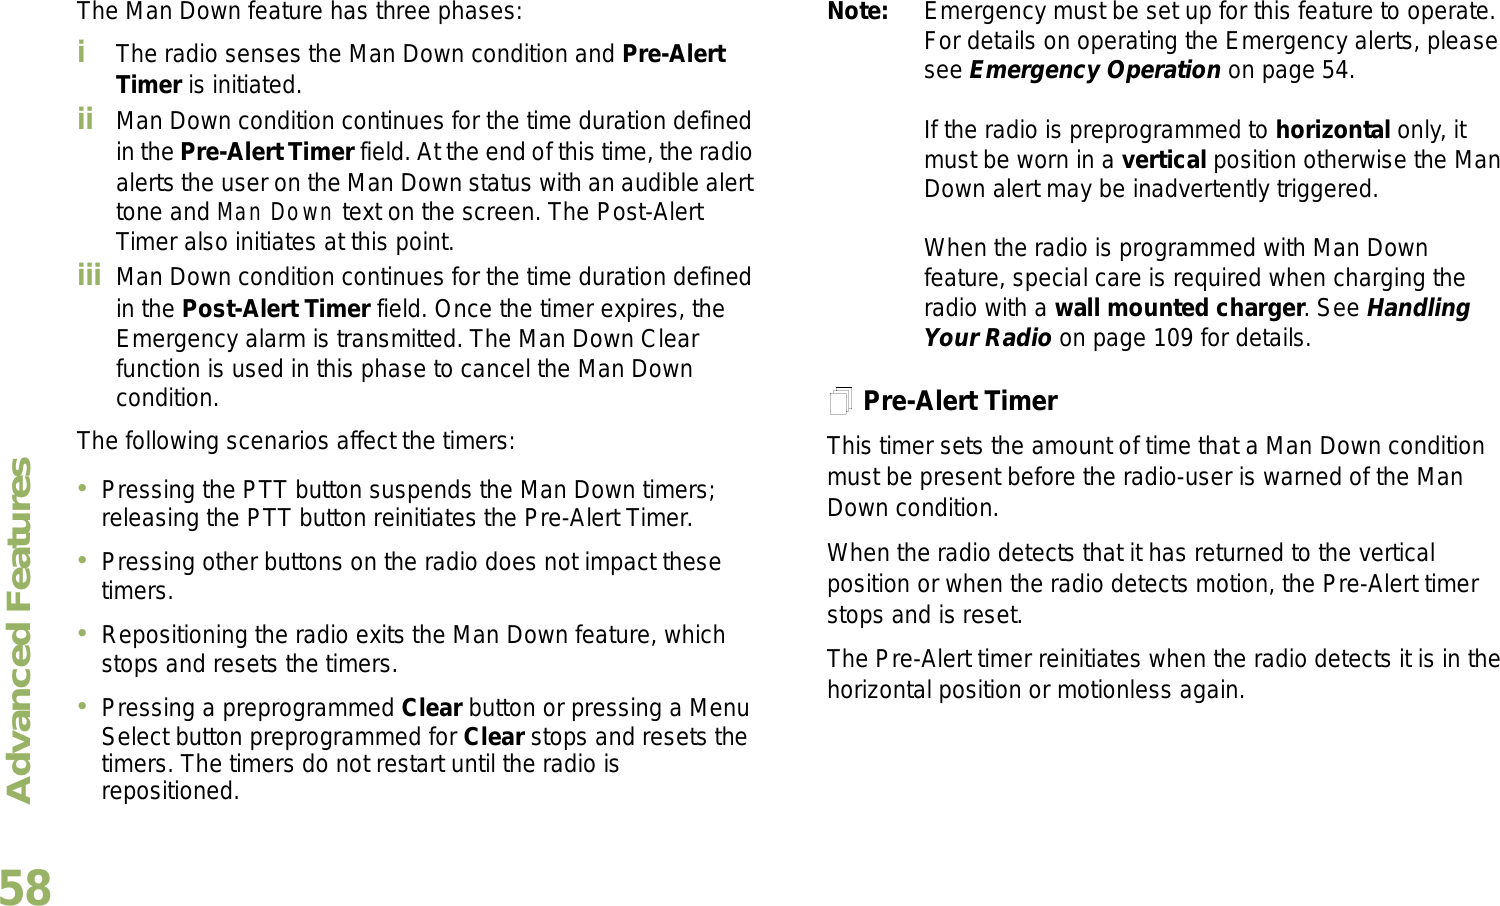 Advanced FeaturesEnglish58The Man Down feature has three phases: iThe radio senses the Man Down condition and Pre-Alert Timer is initiated. ii Man Down condition continues for the time duration defined in the Pre-Alert Timer field. At the end of this time, the radio alerts the user on the Man Down status with an audible alert tone and Man Down text on the screen. The Post-Alert Timer also initiates at this point.iii Man Down condition continues for the time duration defined in the Post-Alert Timer field. Once the timer expires, the Emergency alarm is transmitted. The Man Down Clear function is used in this phase to cancel the Man Down condition.The following scenarios affect the timers:Pressing the PTT button suspends the Man Down timers; releasing the PTT button reinitiates the Pre-Alert Timer. Pressing other buttons on the radio does not impact these timers.Repositioning the radio exits the Man Down feature, which stops and resets the timers.Pressing a preprogrammed Clear button or pressing a Menu Select button preprogrammed for Clear stops and resets the timers. The timers do not restart until the radio is repositioned.Note: Emergency must be set up for this feature to operate. For details on operating the Emergency alerts, please see Emergency Operation on page 54.If the radio is preprogrammed to horizontal only, it must be worn in a vertical position otherwise the Man Down alert may be inadvertently triggered. When the radio is programmed with Man Down feature, special care is required when charging the radio with a wall mounted charger. See Handling Your Radio on page 109 for details.Pre-Alert TimerThis timer sets the amount of time that a Man Down condition must be present before the radio-user is warned of the Man Down condition. When the radio detects that it has returned to the vertical position or when the radio detects motion, the Pre-Alert timer stops and is reset. The Pre-Alert timer reinitiates when the radio detects it is in the horizontal position or motionless again.